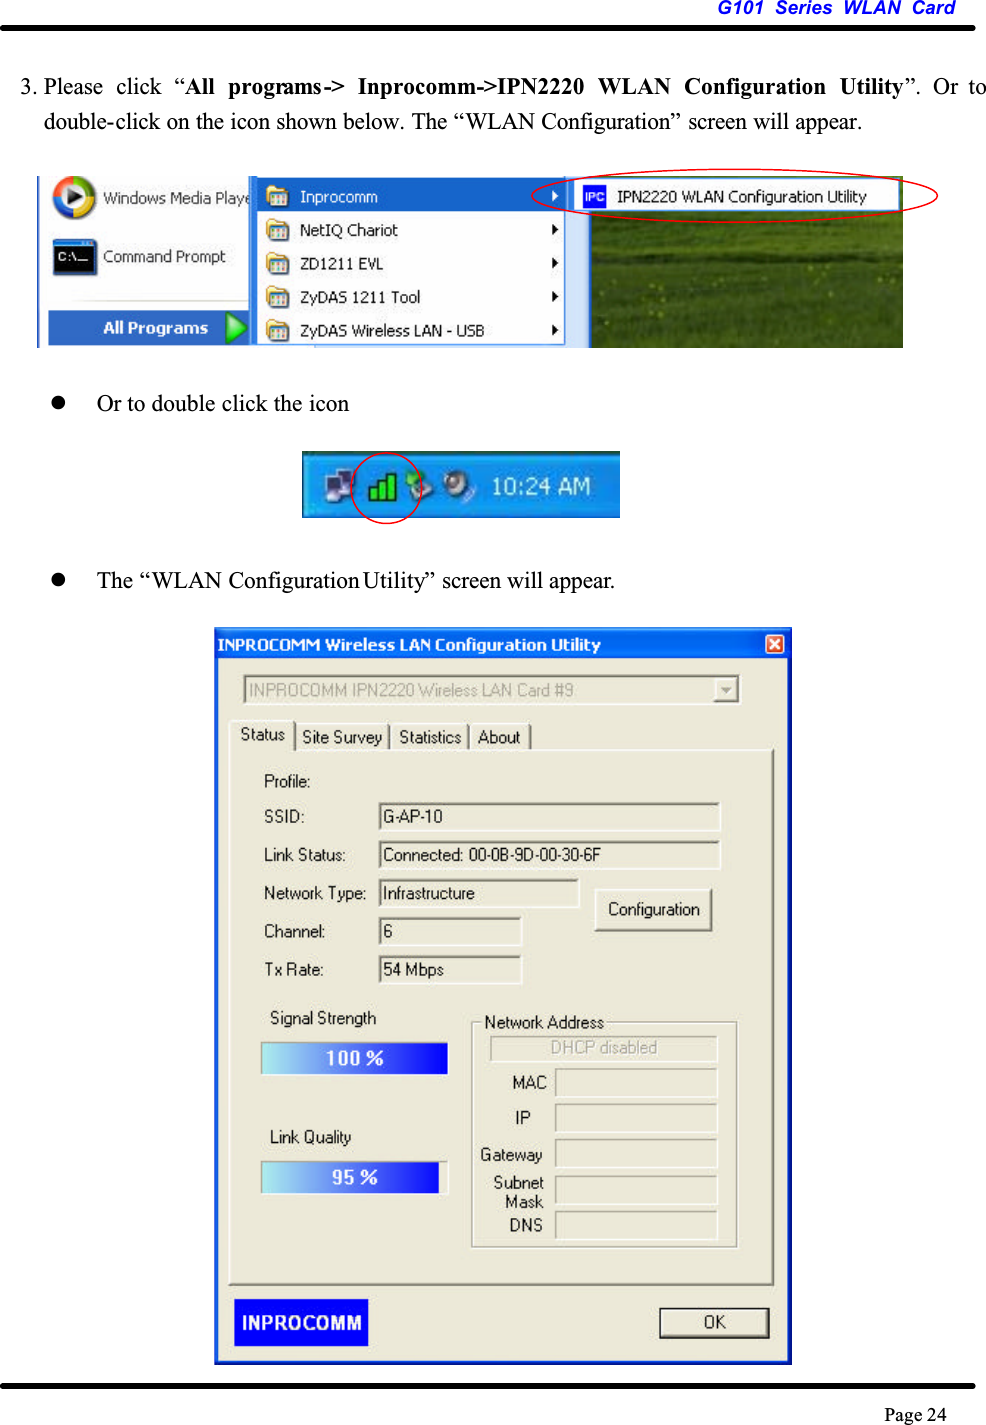 G101 Series WLAN CardPage 243. Please click “All programs-&gt; Inprocomm-&gt;IPN2220 WLAN Configuration Utility”. Or to double-click on the icon shown below. The “WLAN Configuration” screen will appear.zOr to double click the iconzThe “WLAN Configuration Utility” screen will appear.